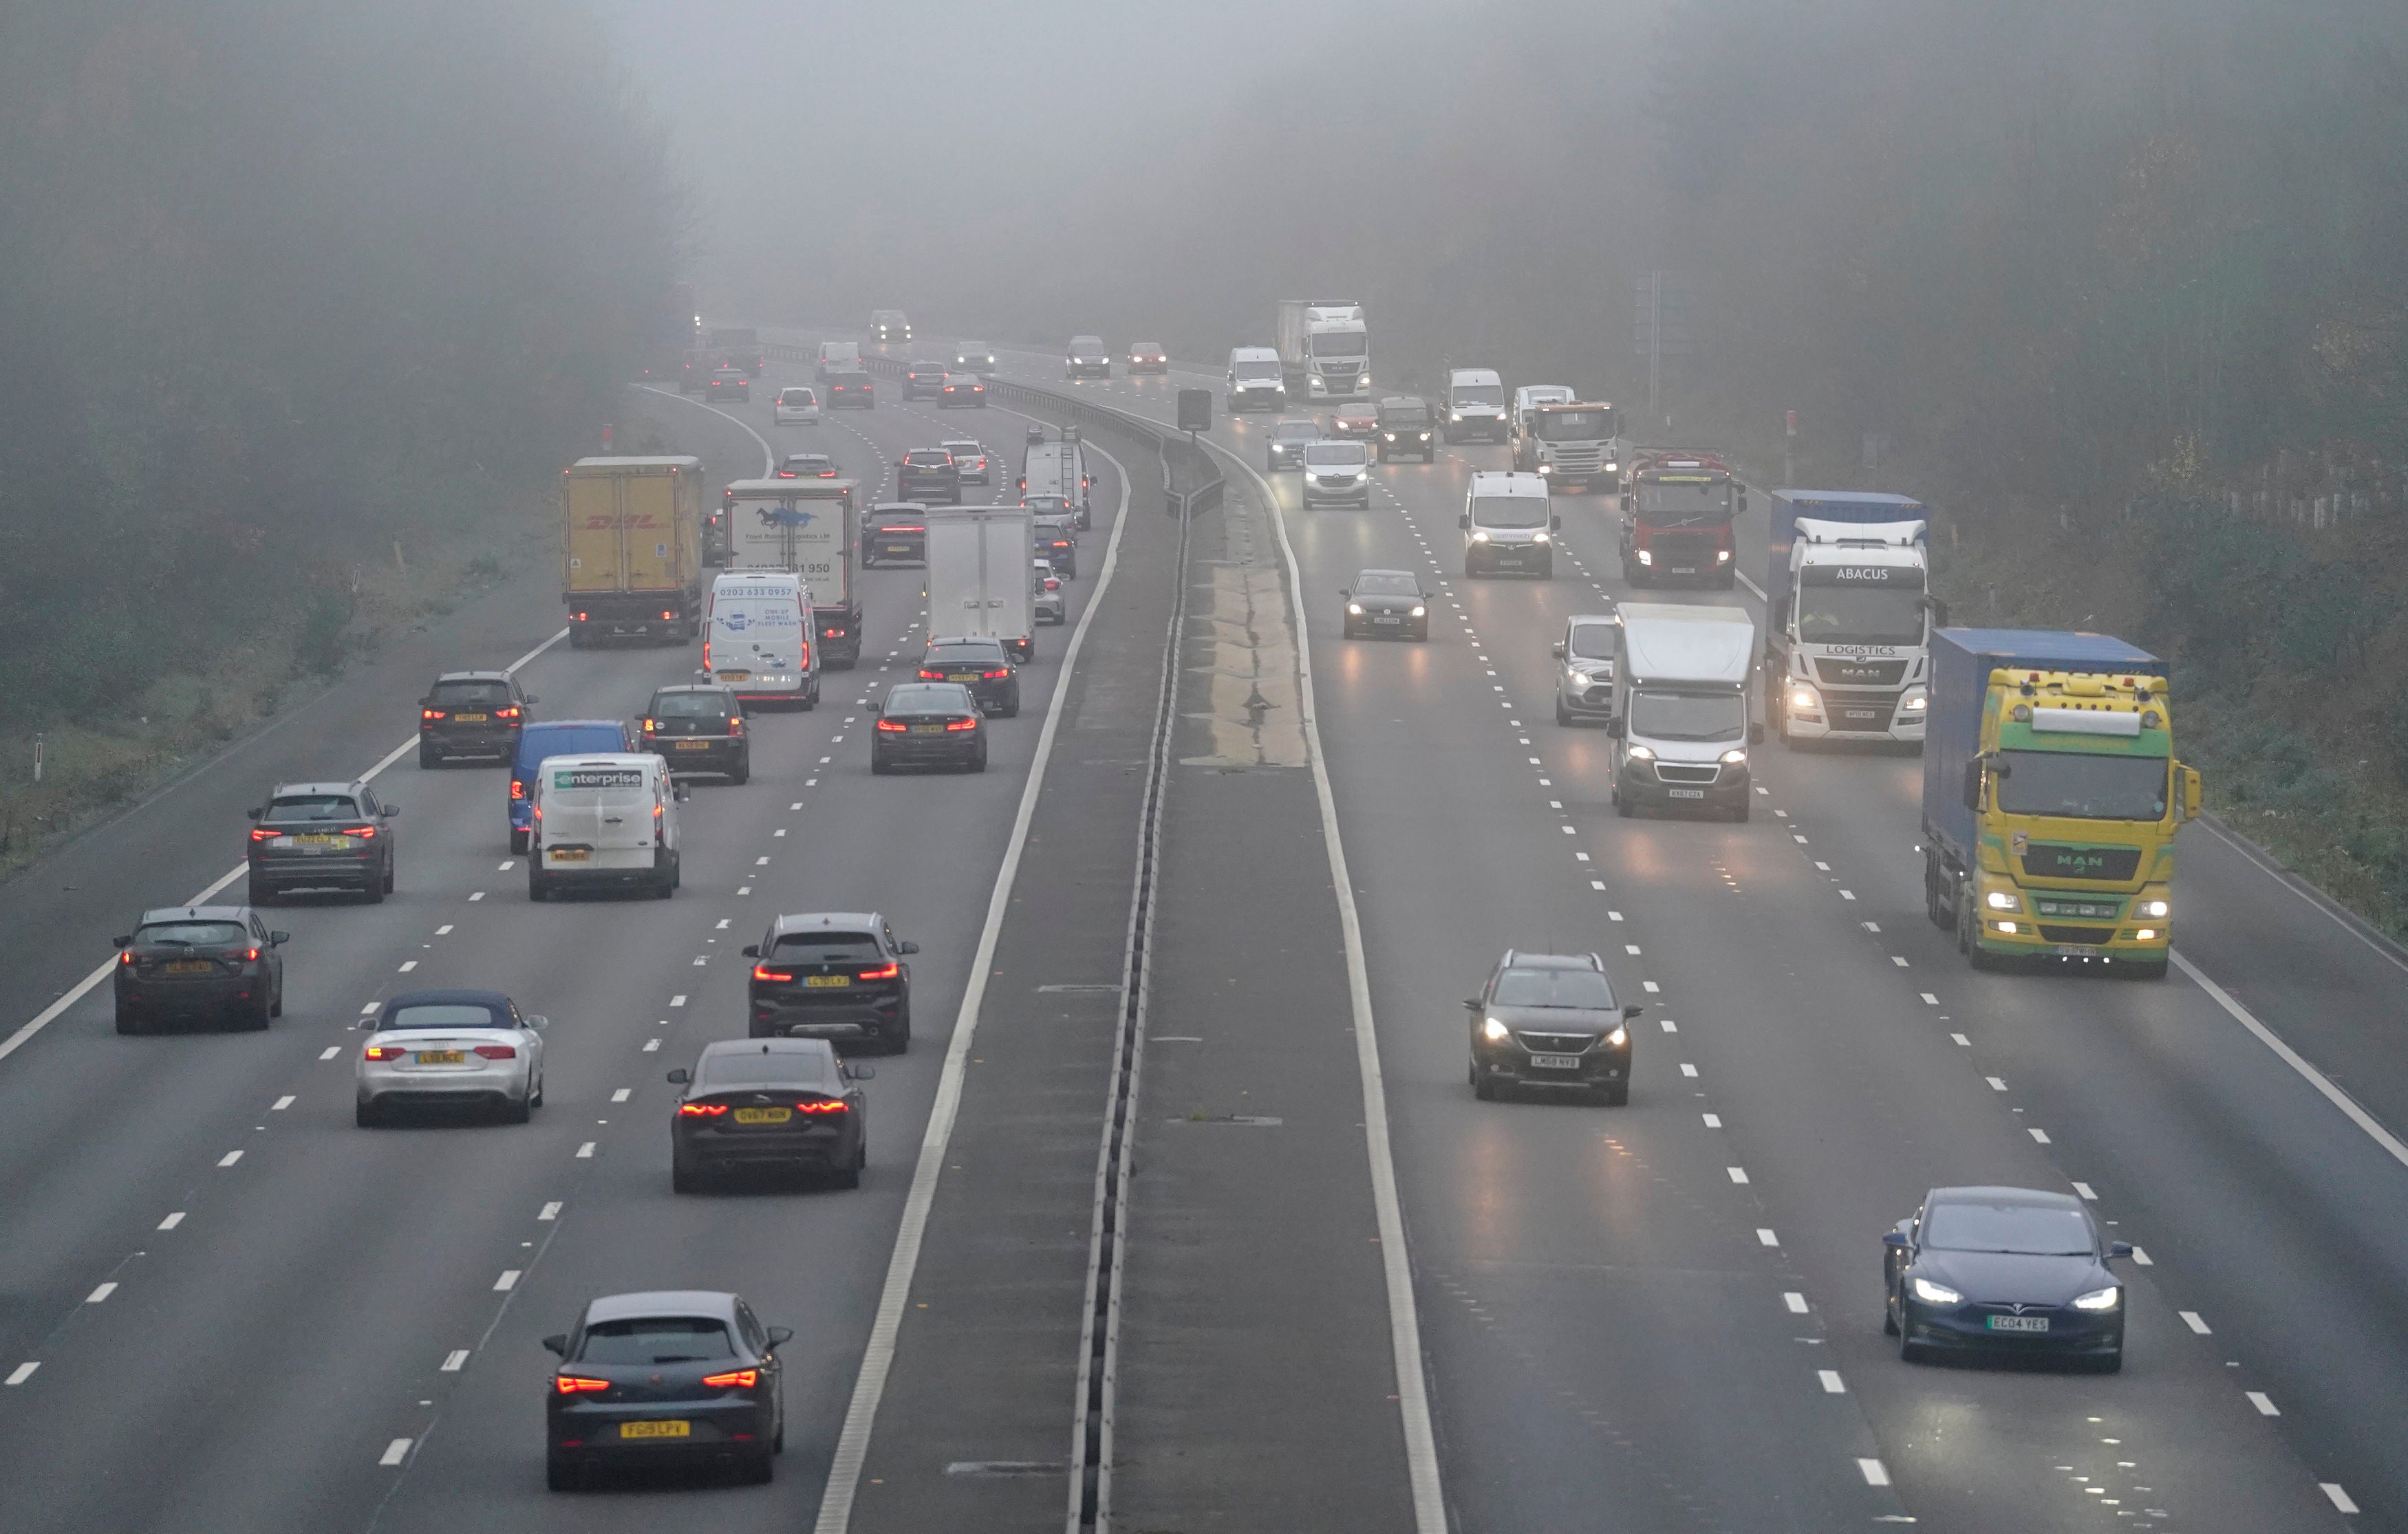 Vehicles drive through fog on the M3 near Old Basing in Hampshire on Friday